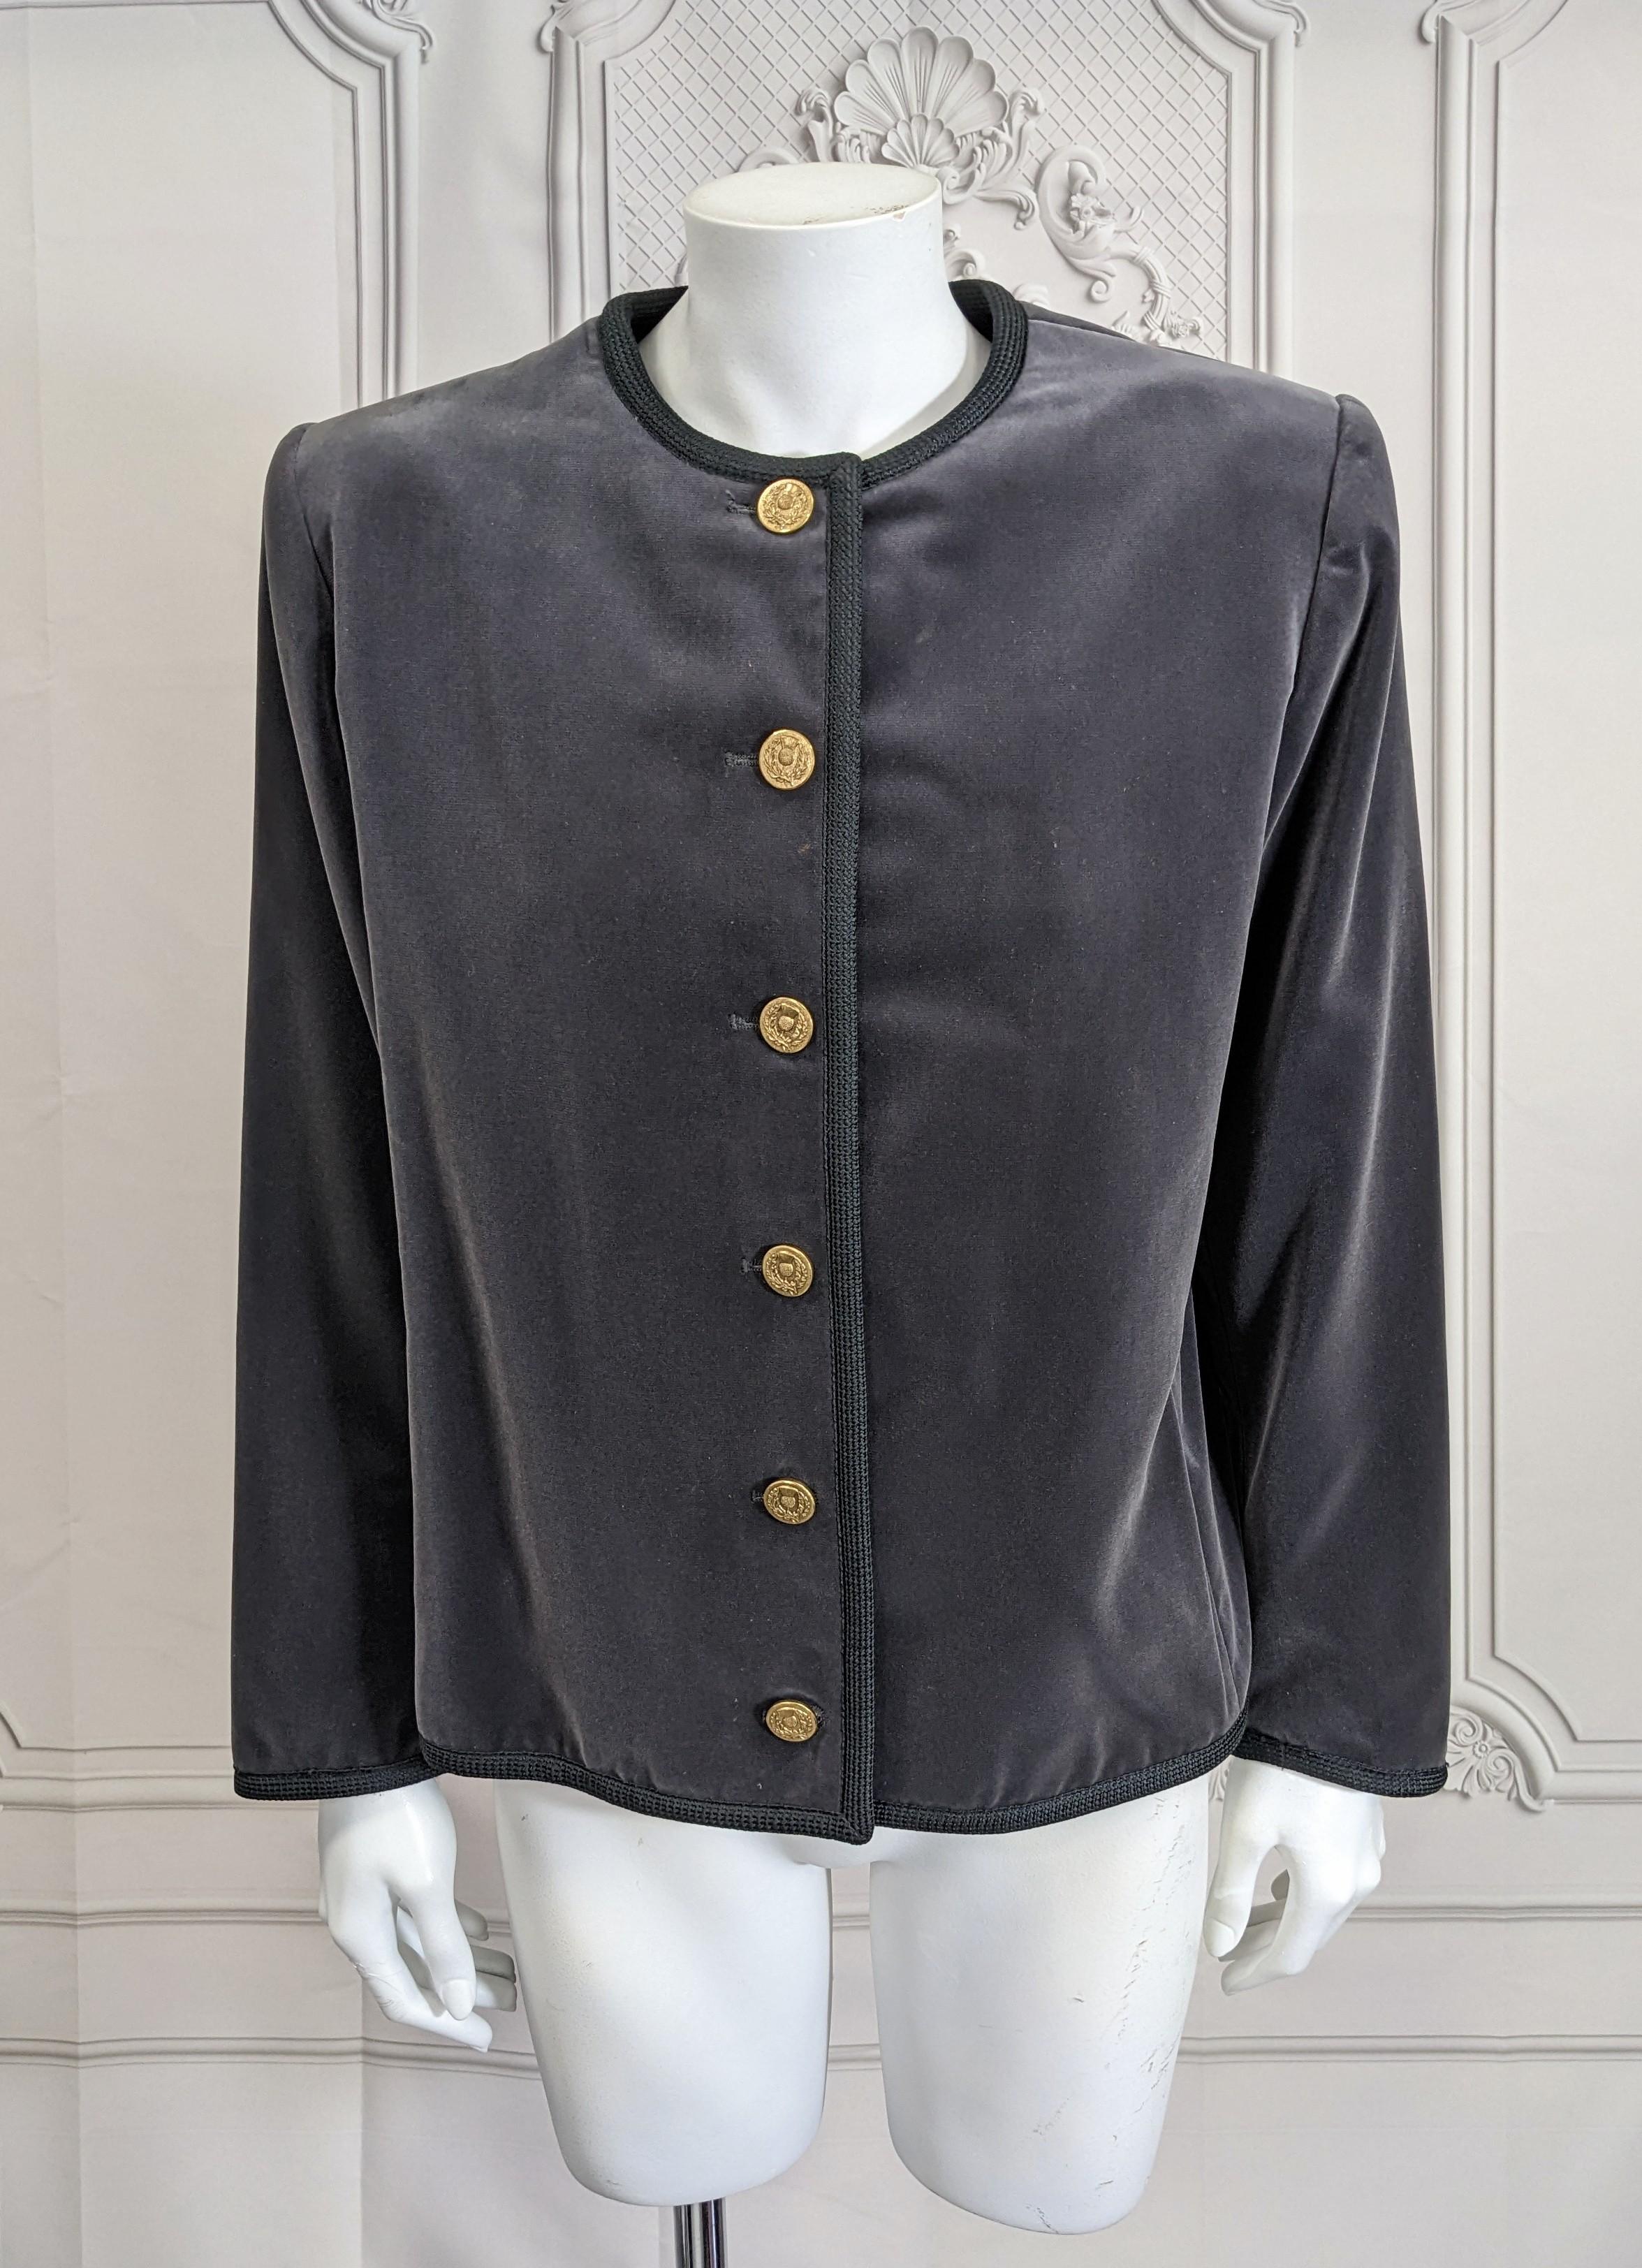 Yves Saint Laurent Gray Velvet Jacket bound in black braid and gilt thistle buttons. Strong shoulders with square cut form. Classic wardrobe staple. 1970's France. Russian Collection. 
Vintage size 42. 